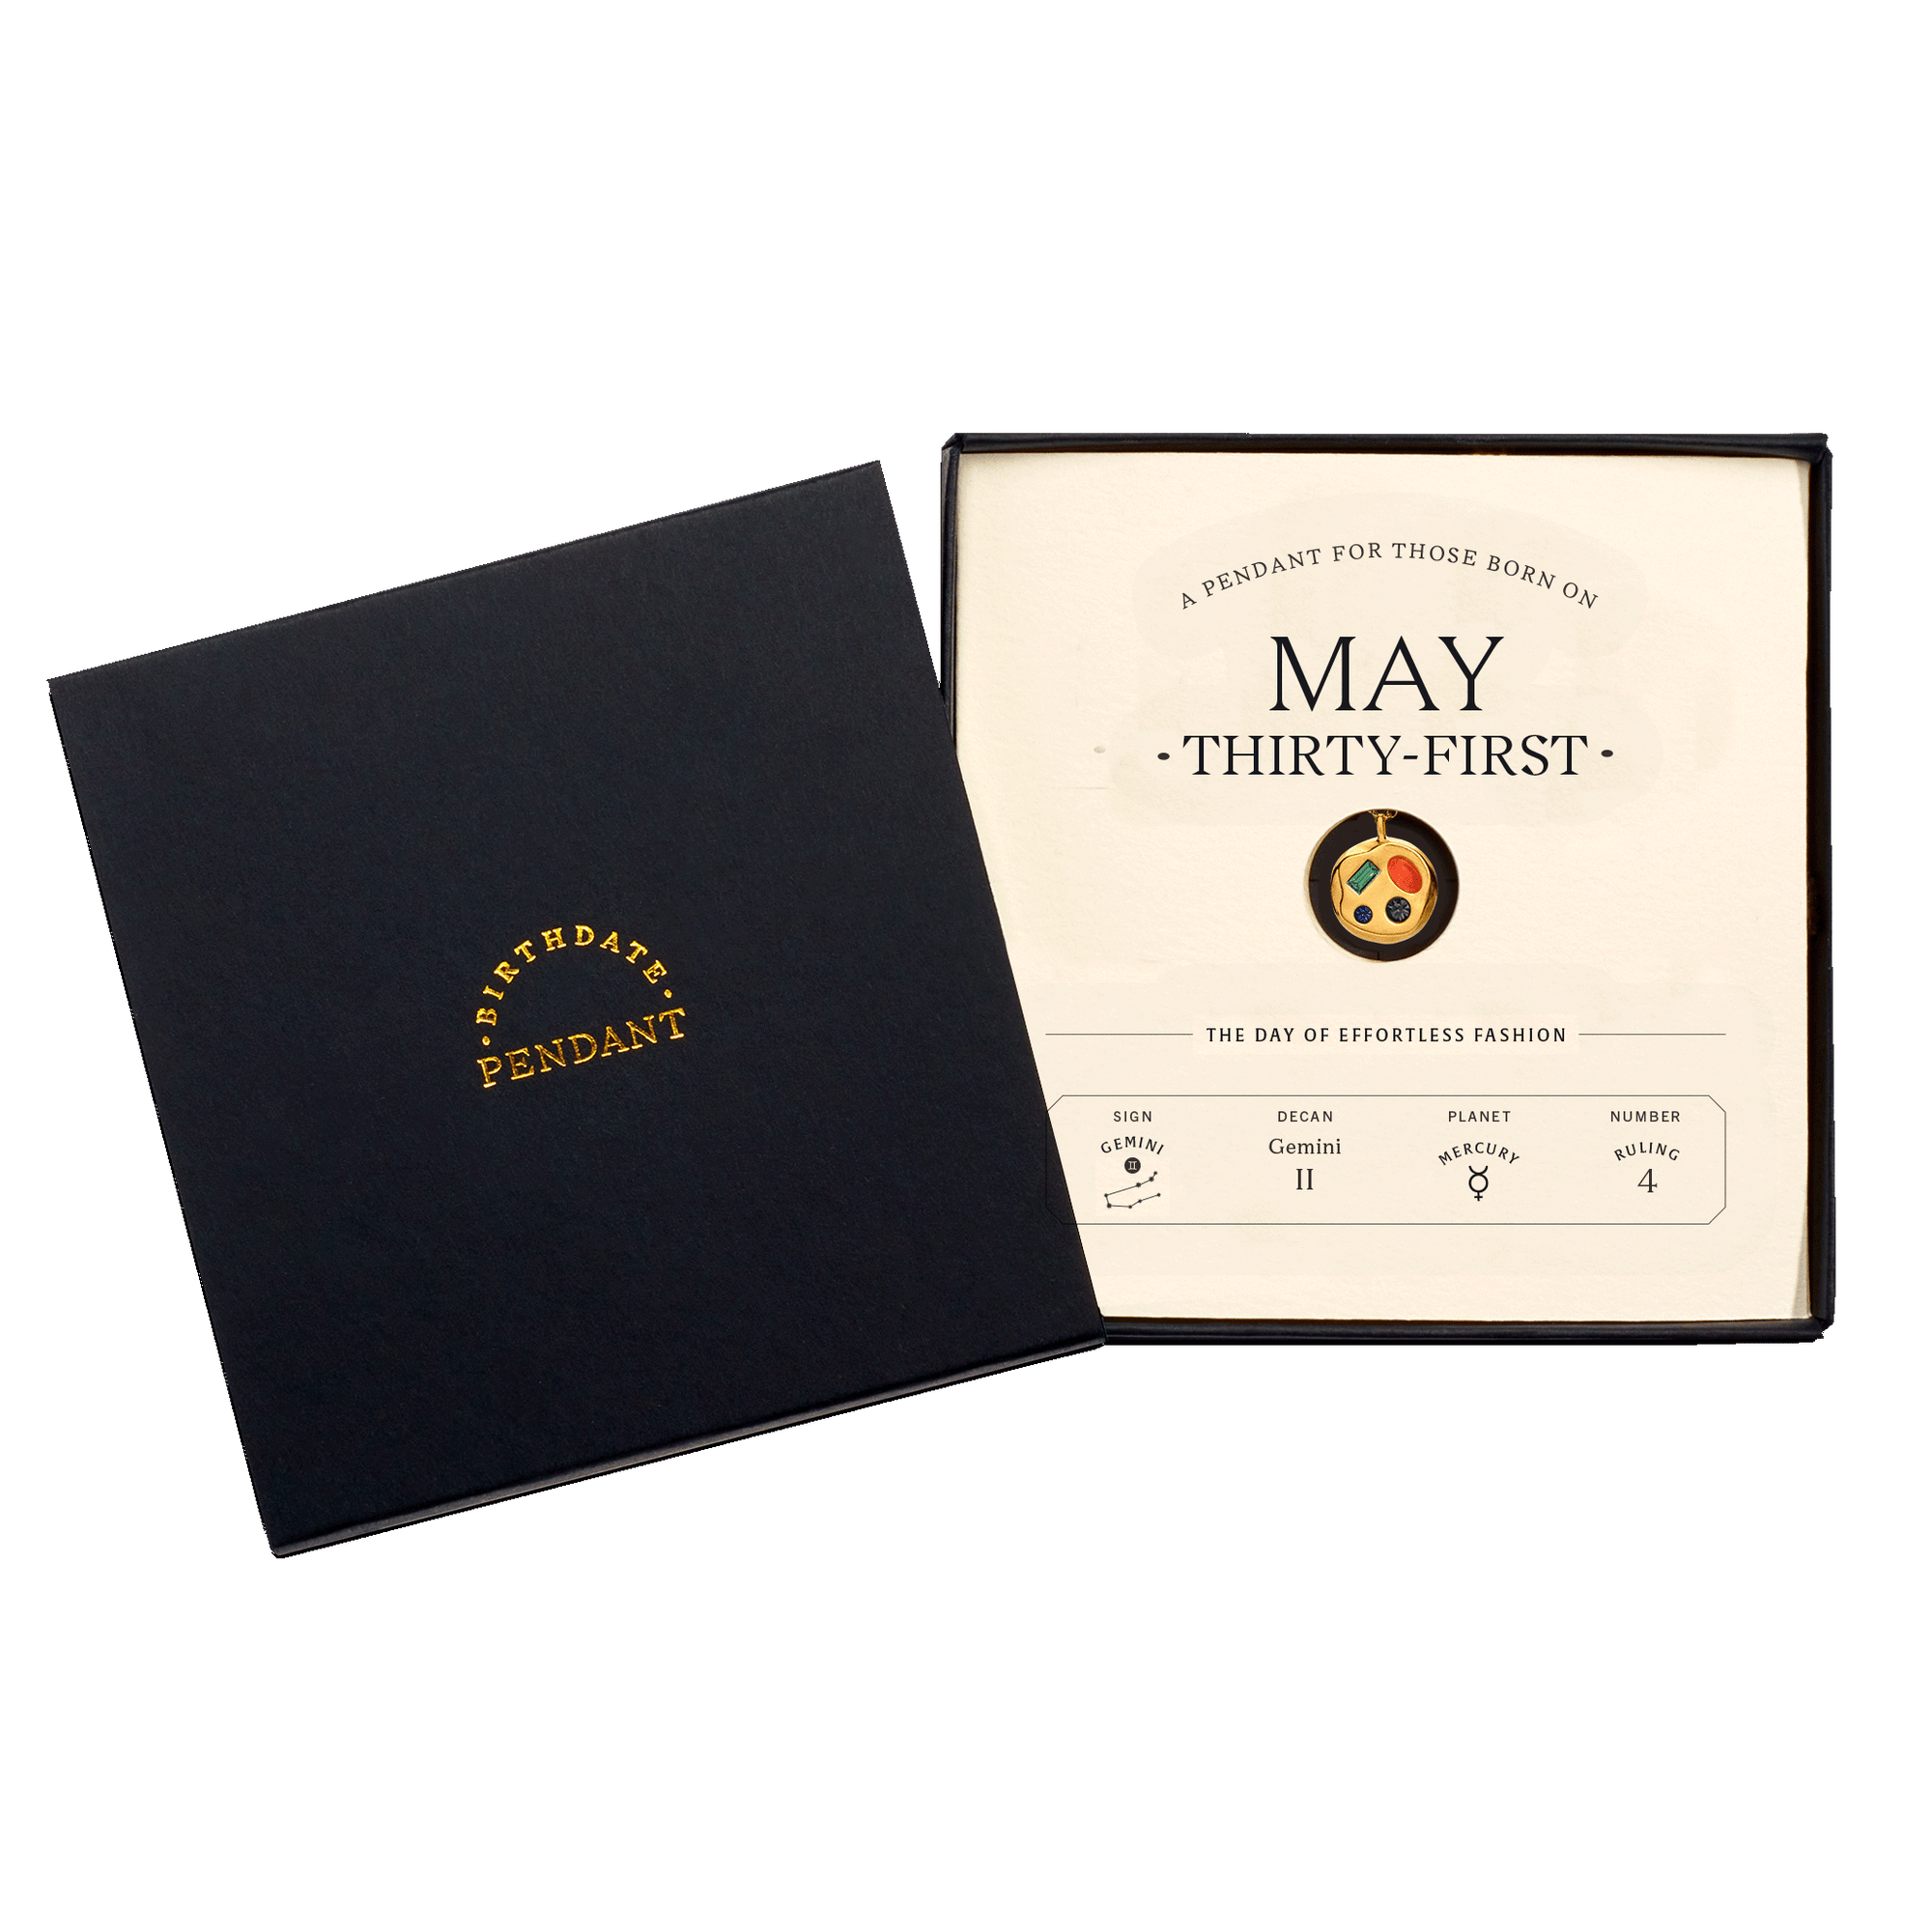 The May Thirty-First Pendant inside its box